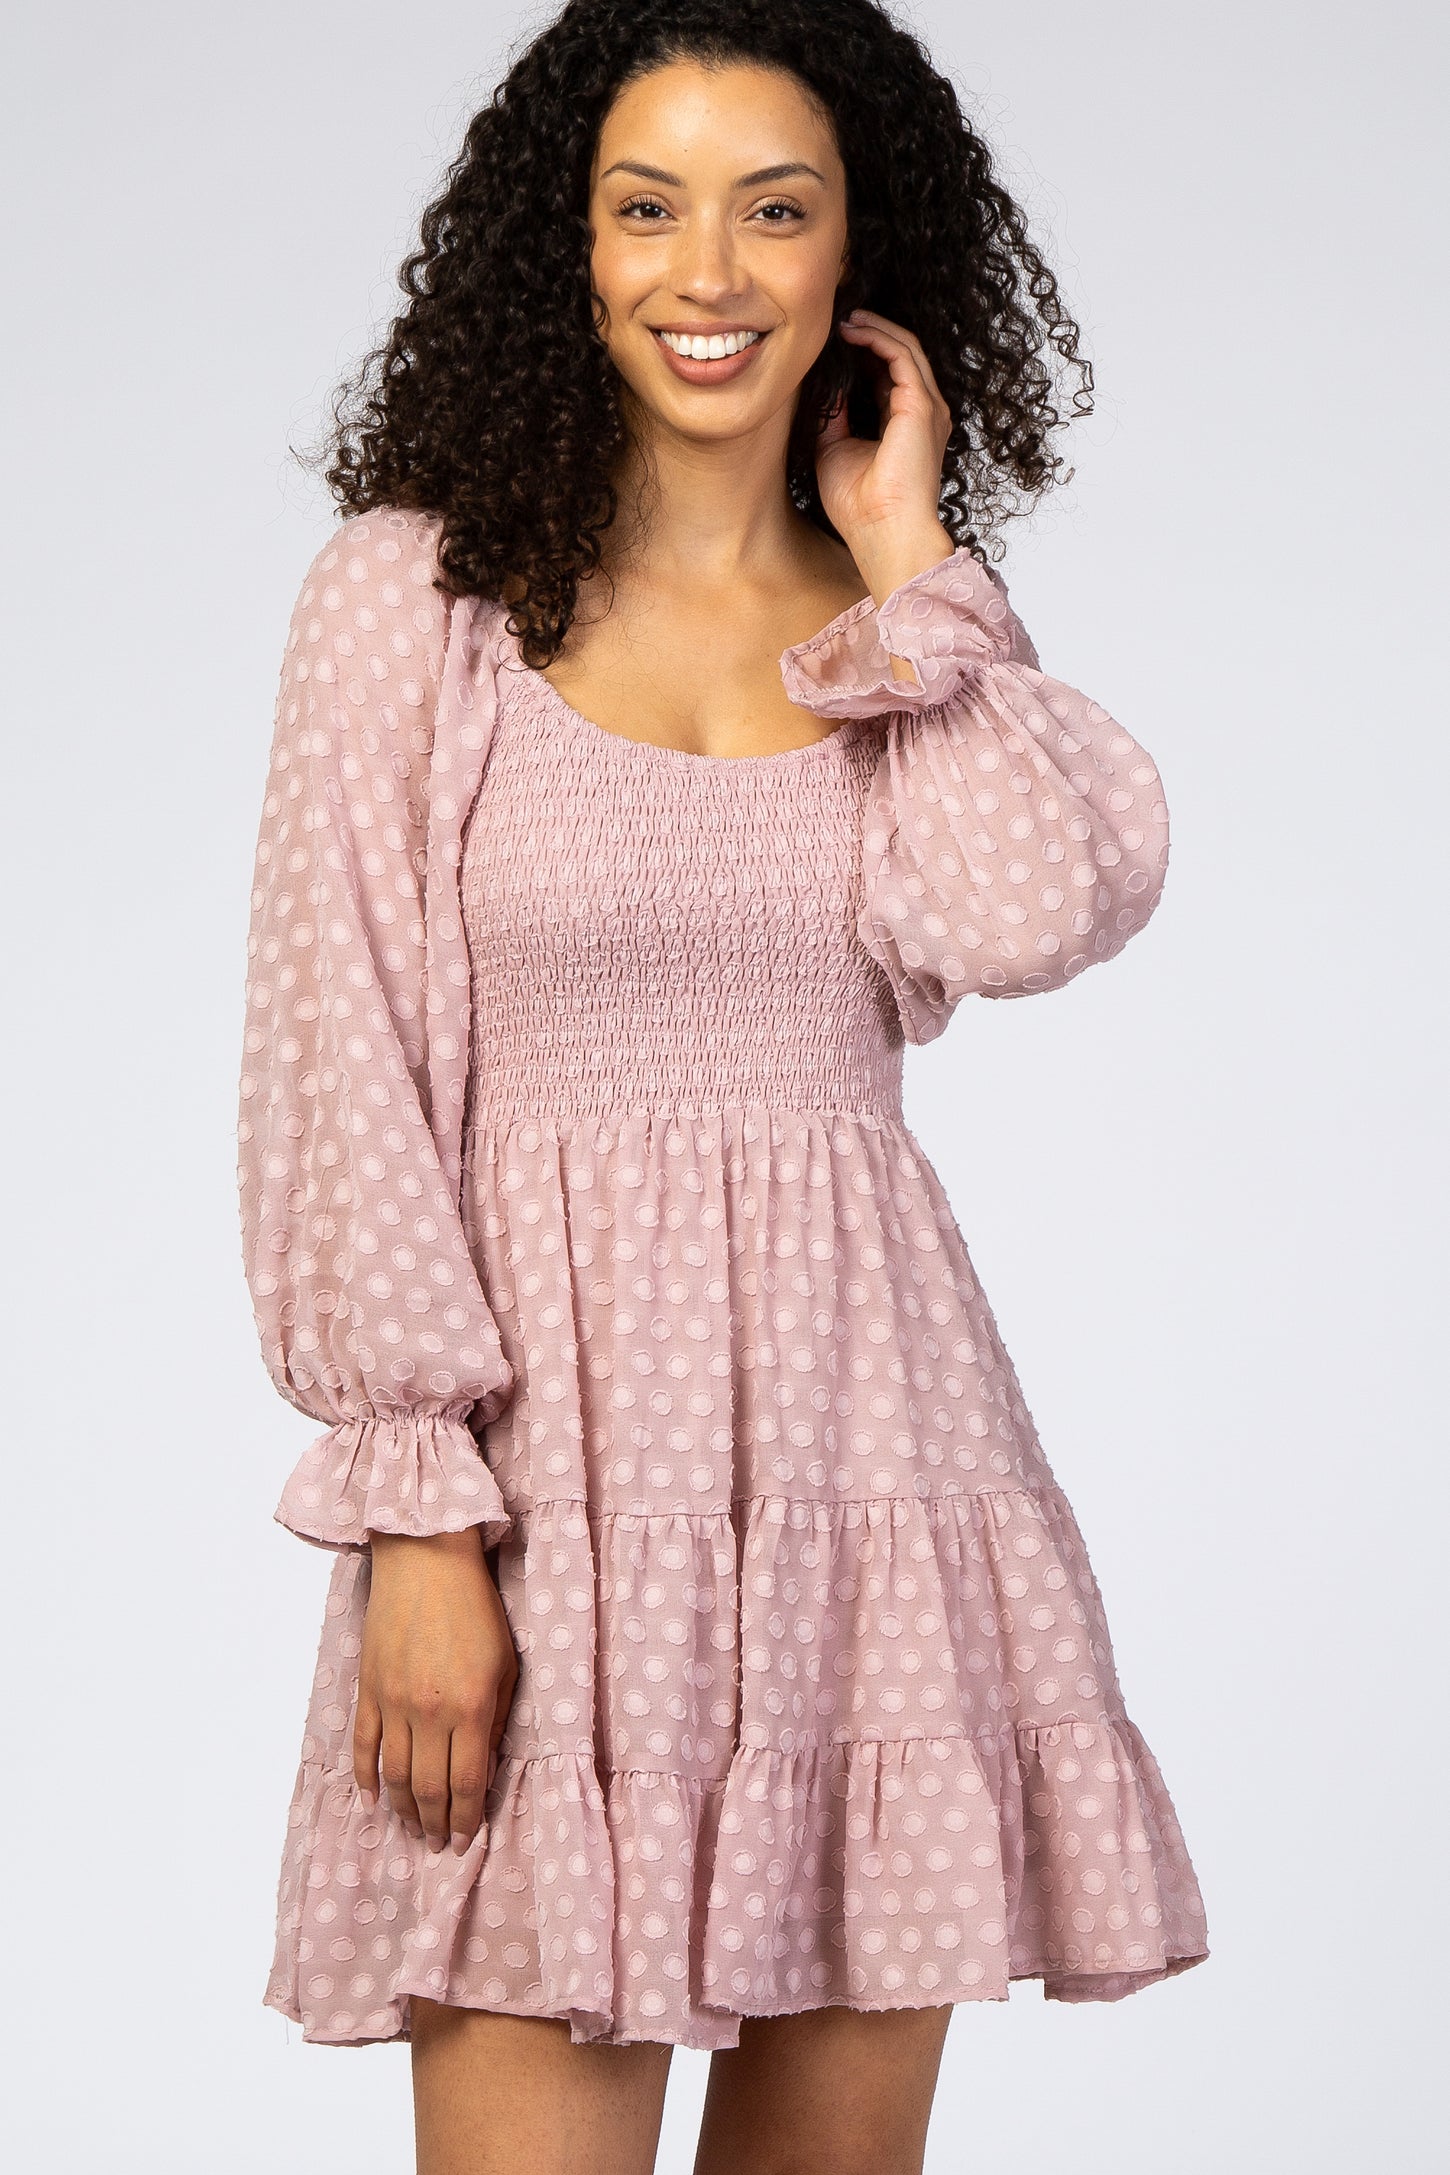 Ruffle Sleeve Tie Back Polka Dot Blouse in Dirty Pink